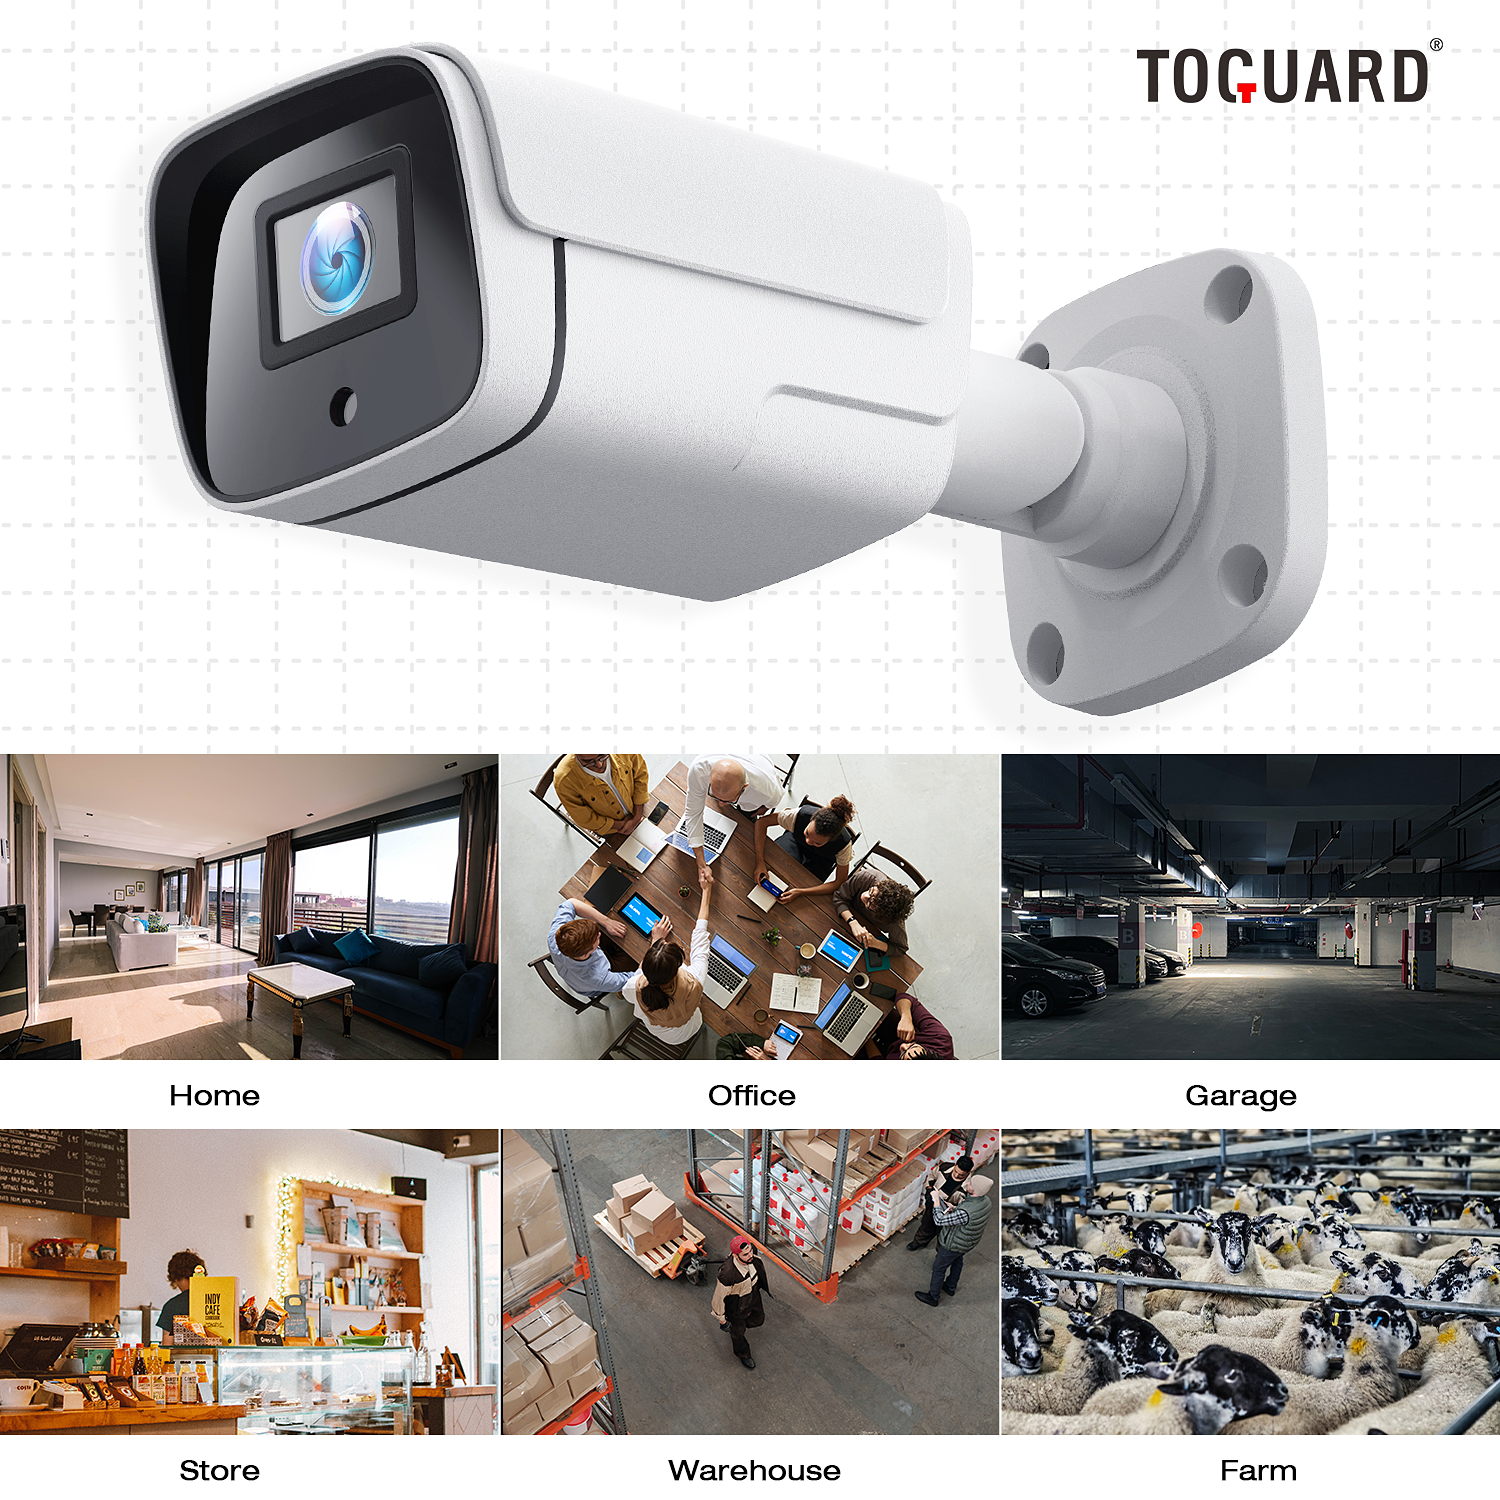 A Single Security Camera For Toguard W504 Security System